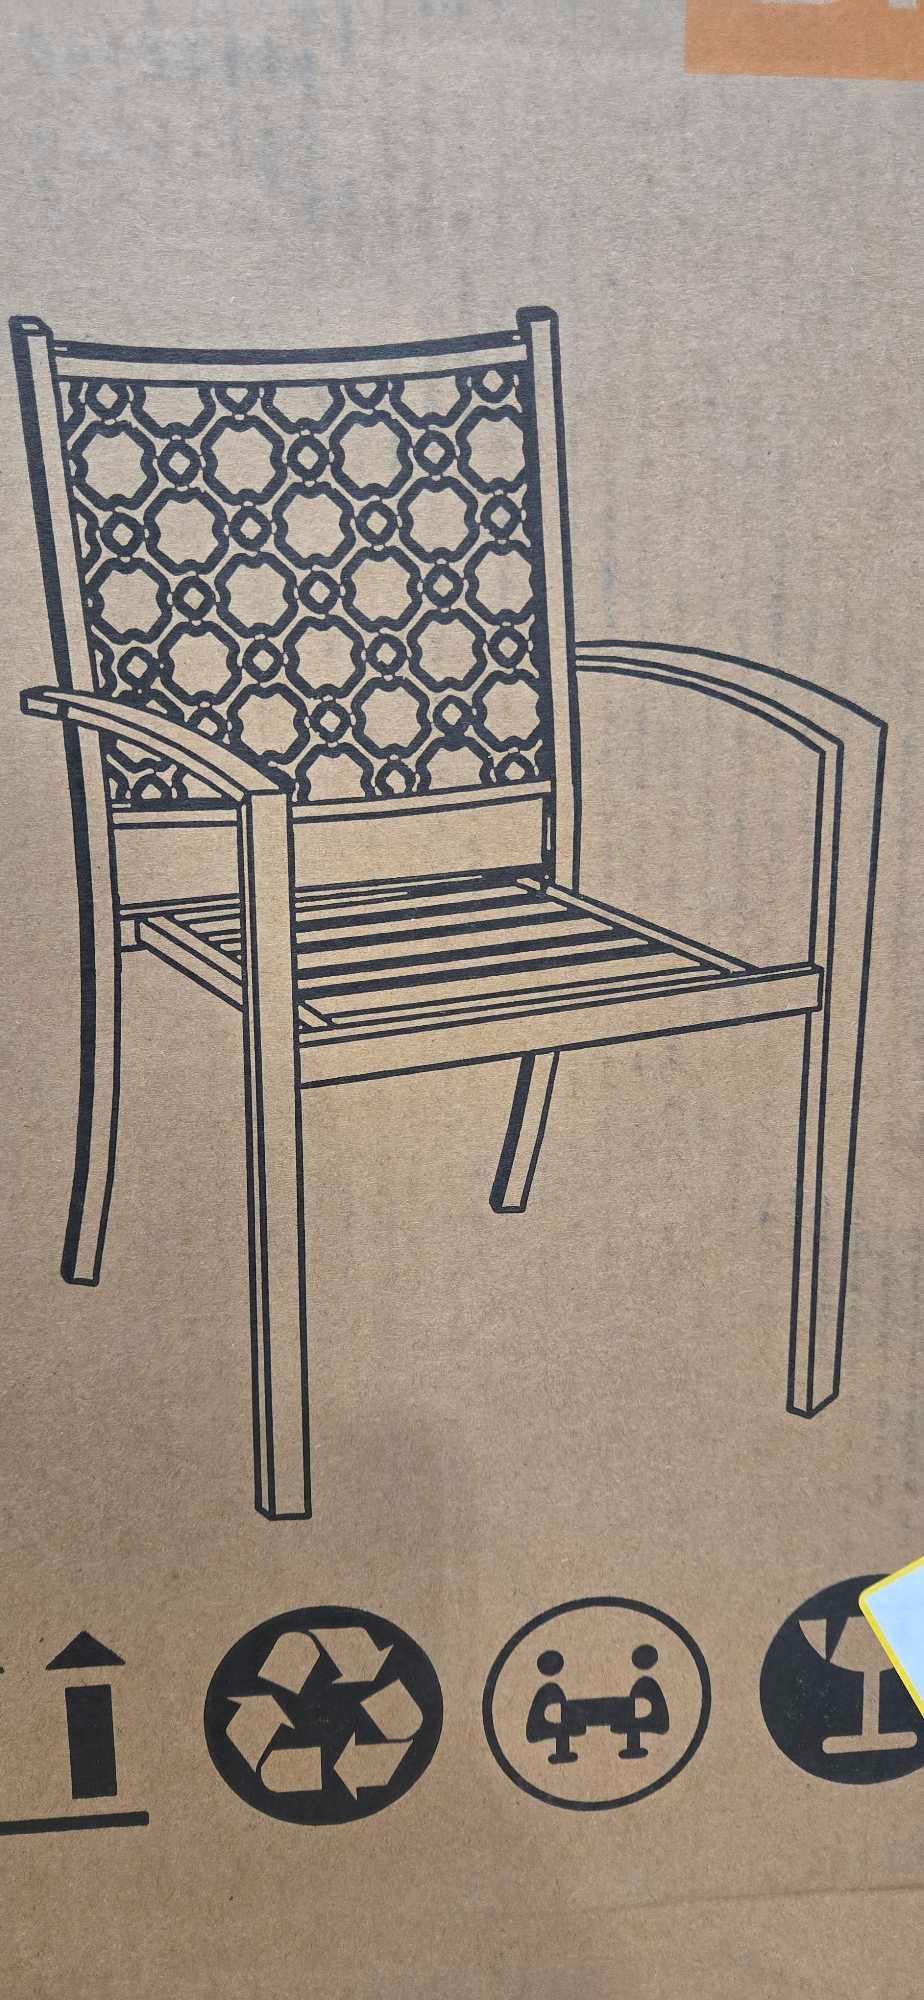 Meooem 2-Pieces of Outdoor Patio Chairs